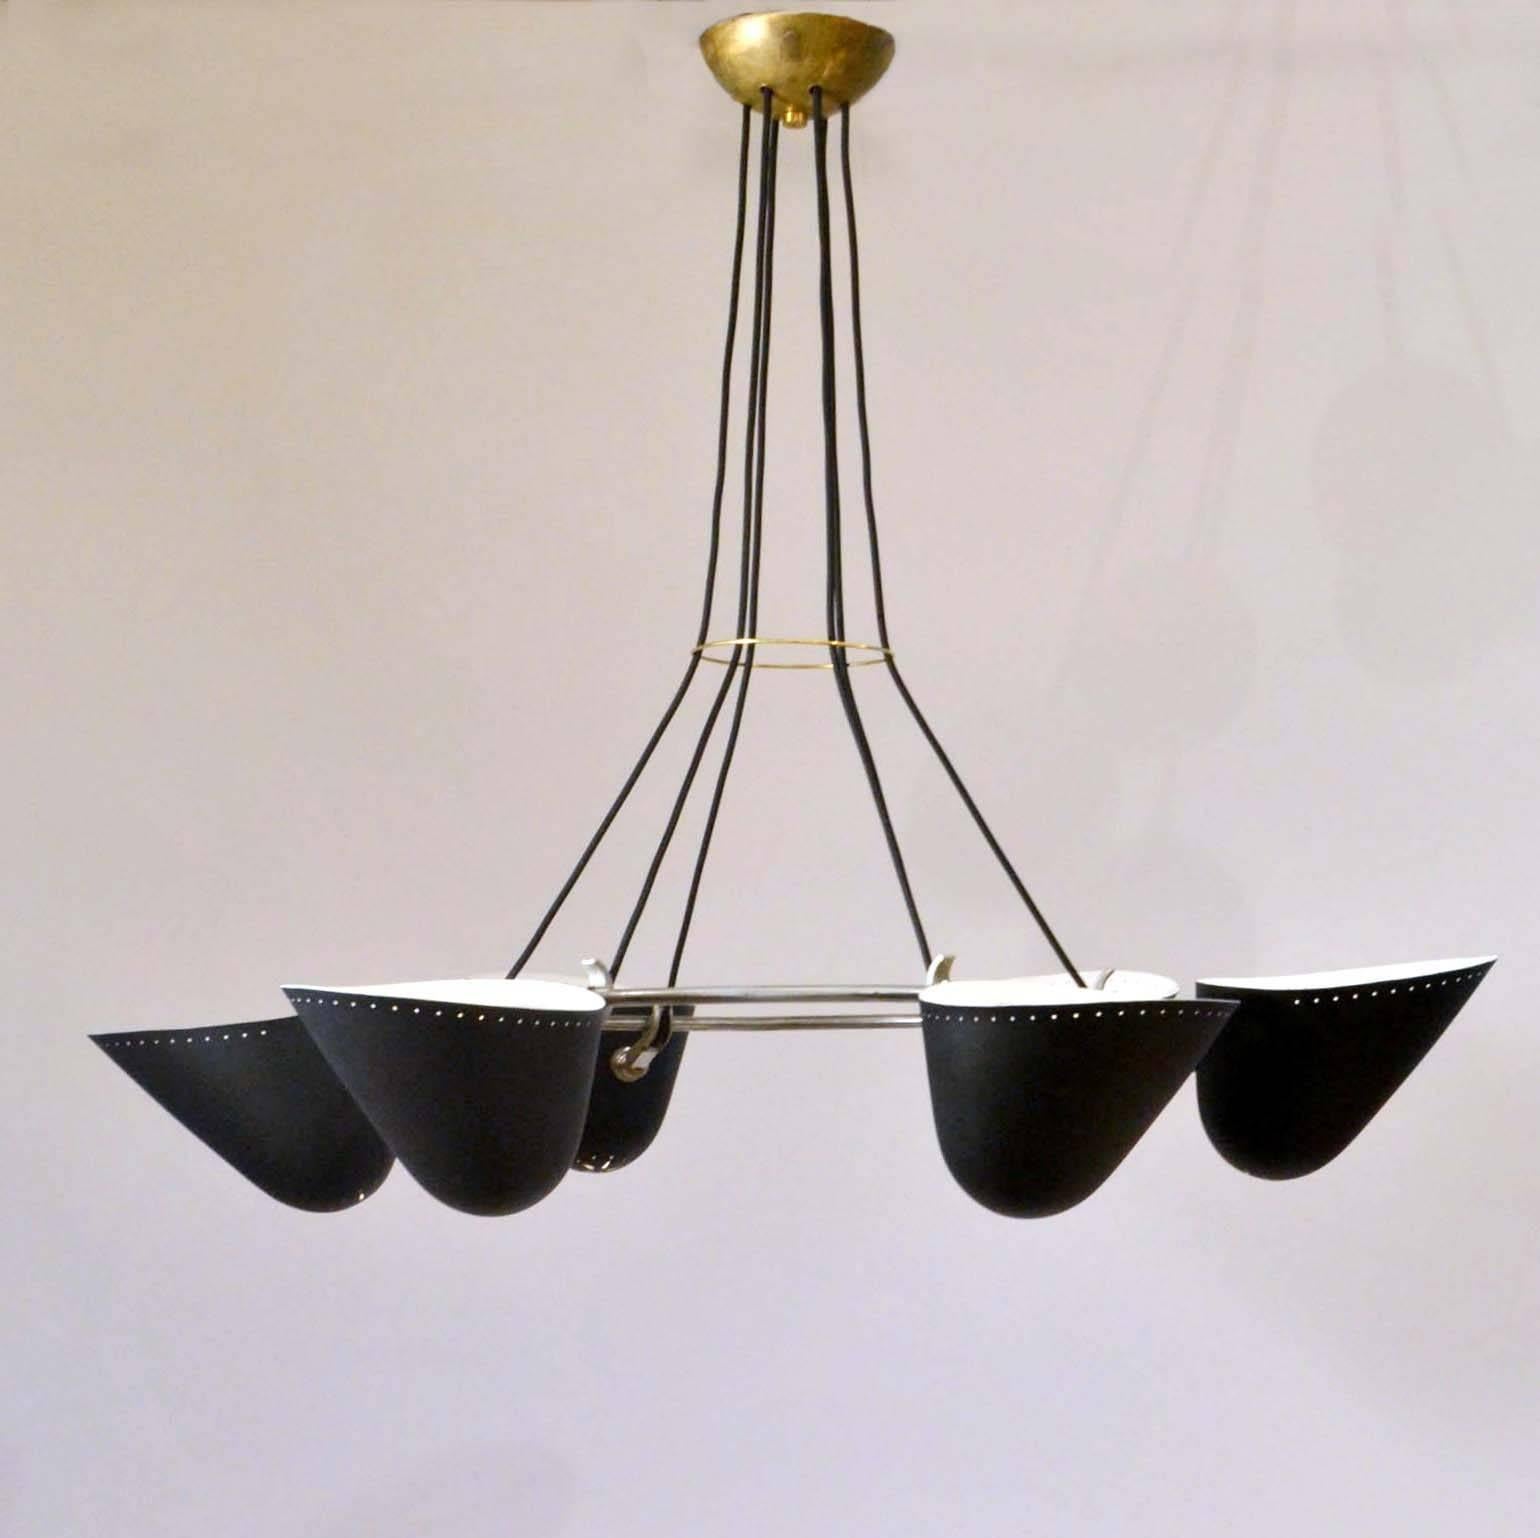 Painted Modernist Black Metal Uplight Chandelier, A.B. Read for Troughton & Young, 1940s